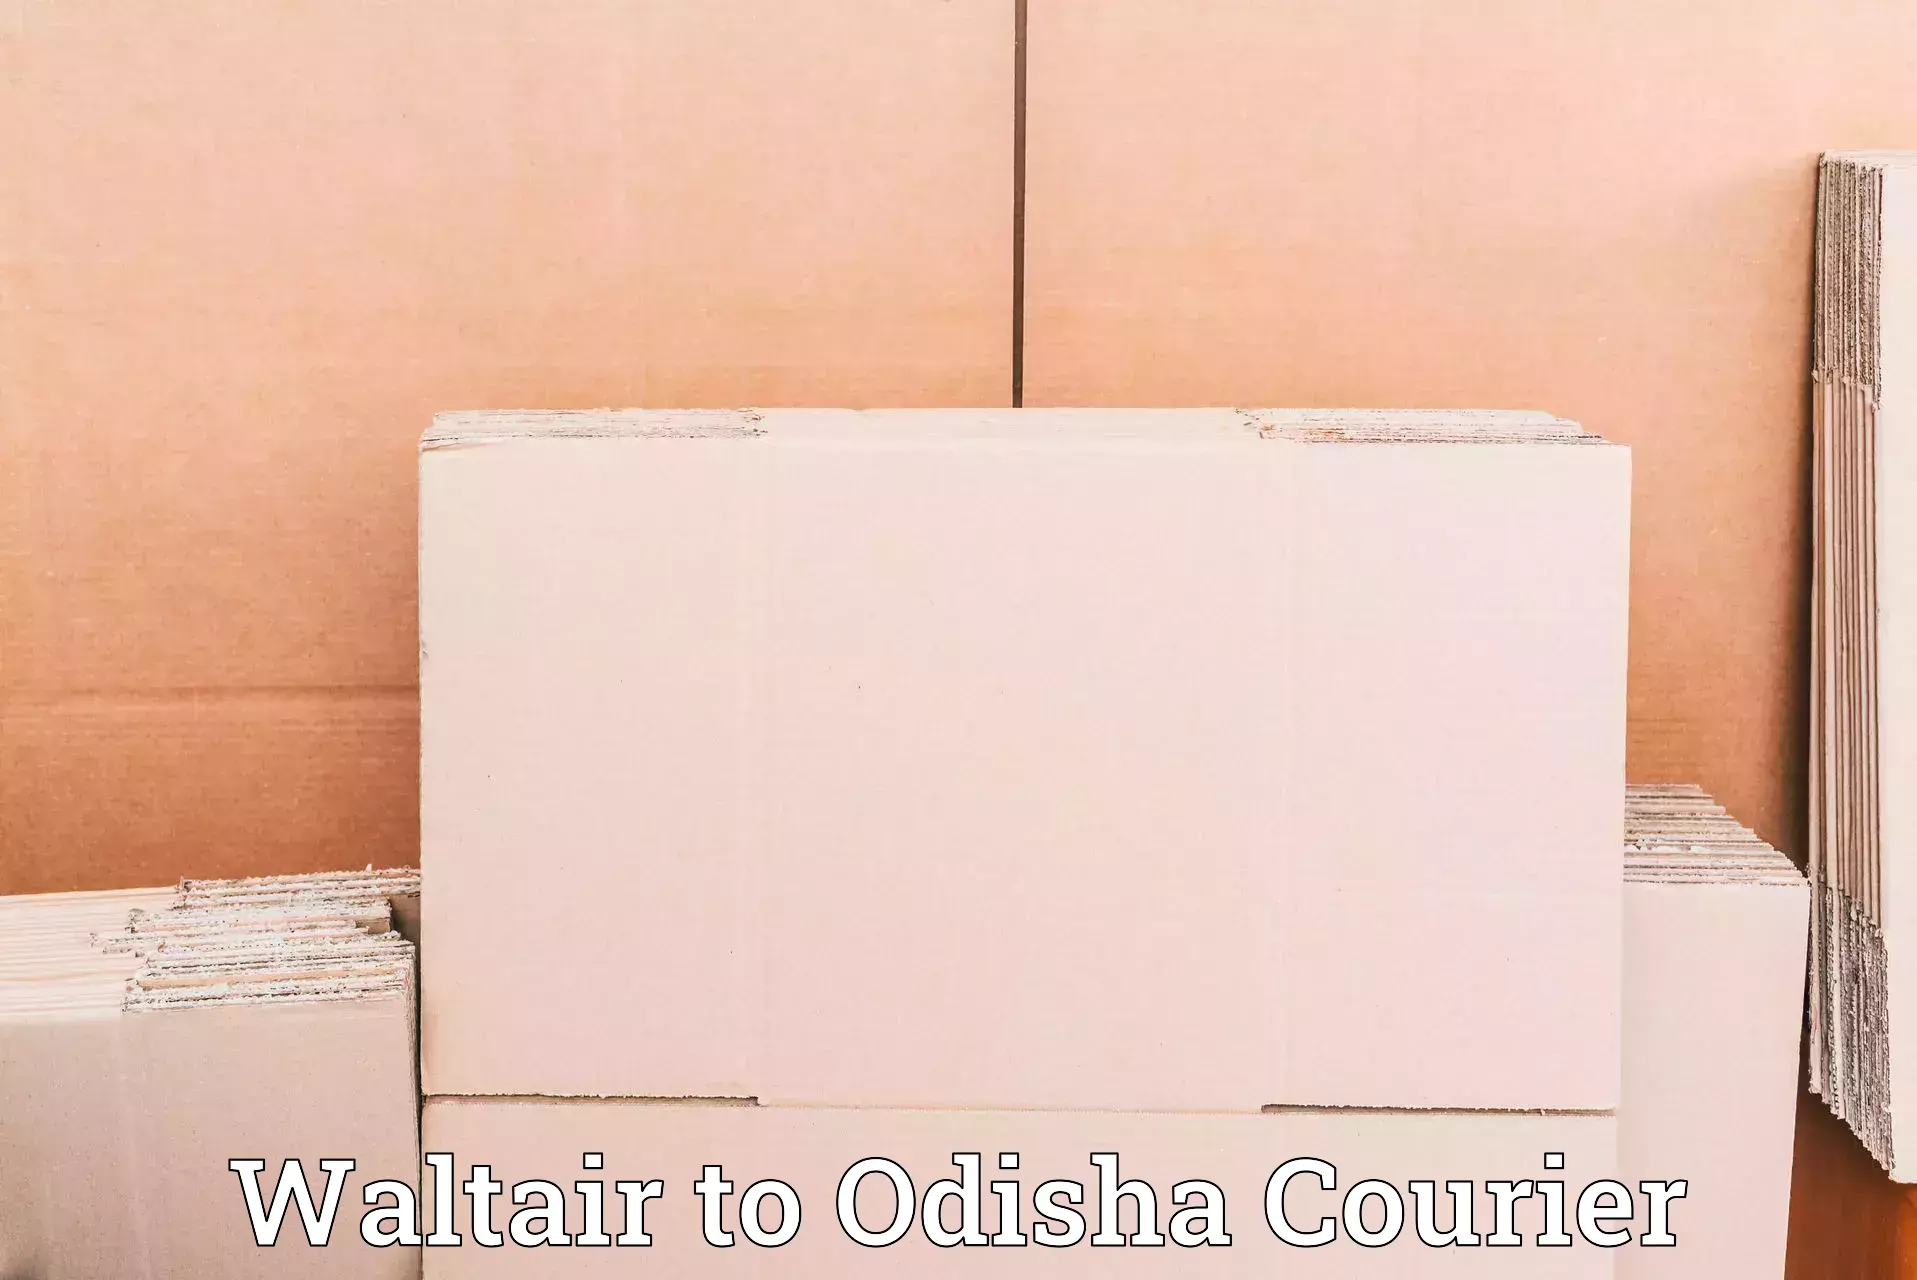 Customer-oriented courier services in Waltair to Cuttack